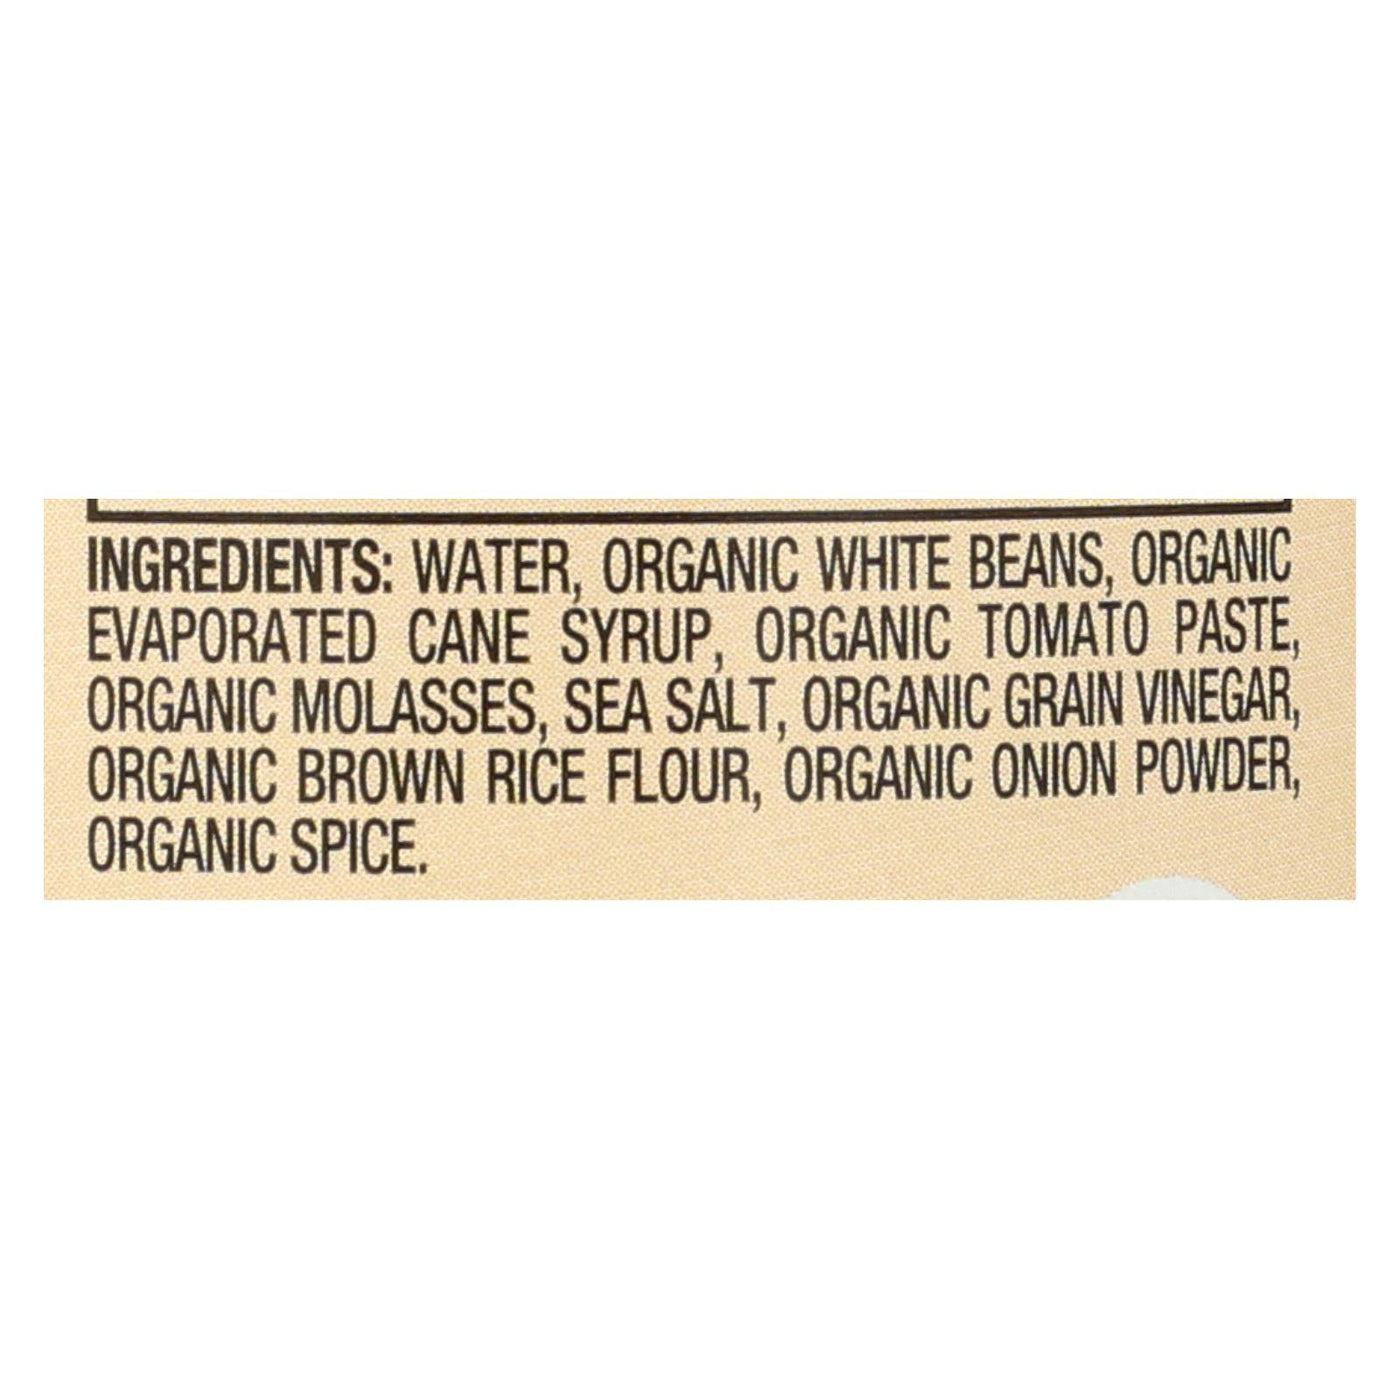 Buy Walnut Acres Organic Baked Beans - Case Of 12 - 15 Oz.  at OnlyNaturals.us